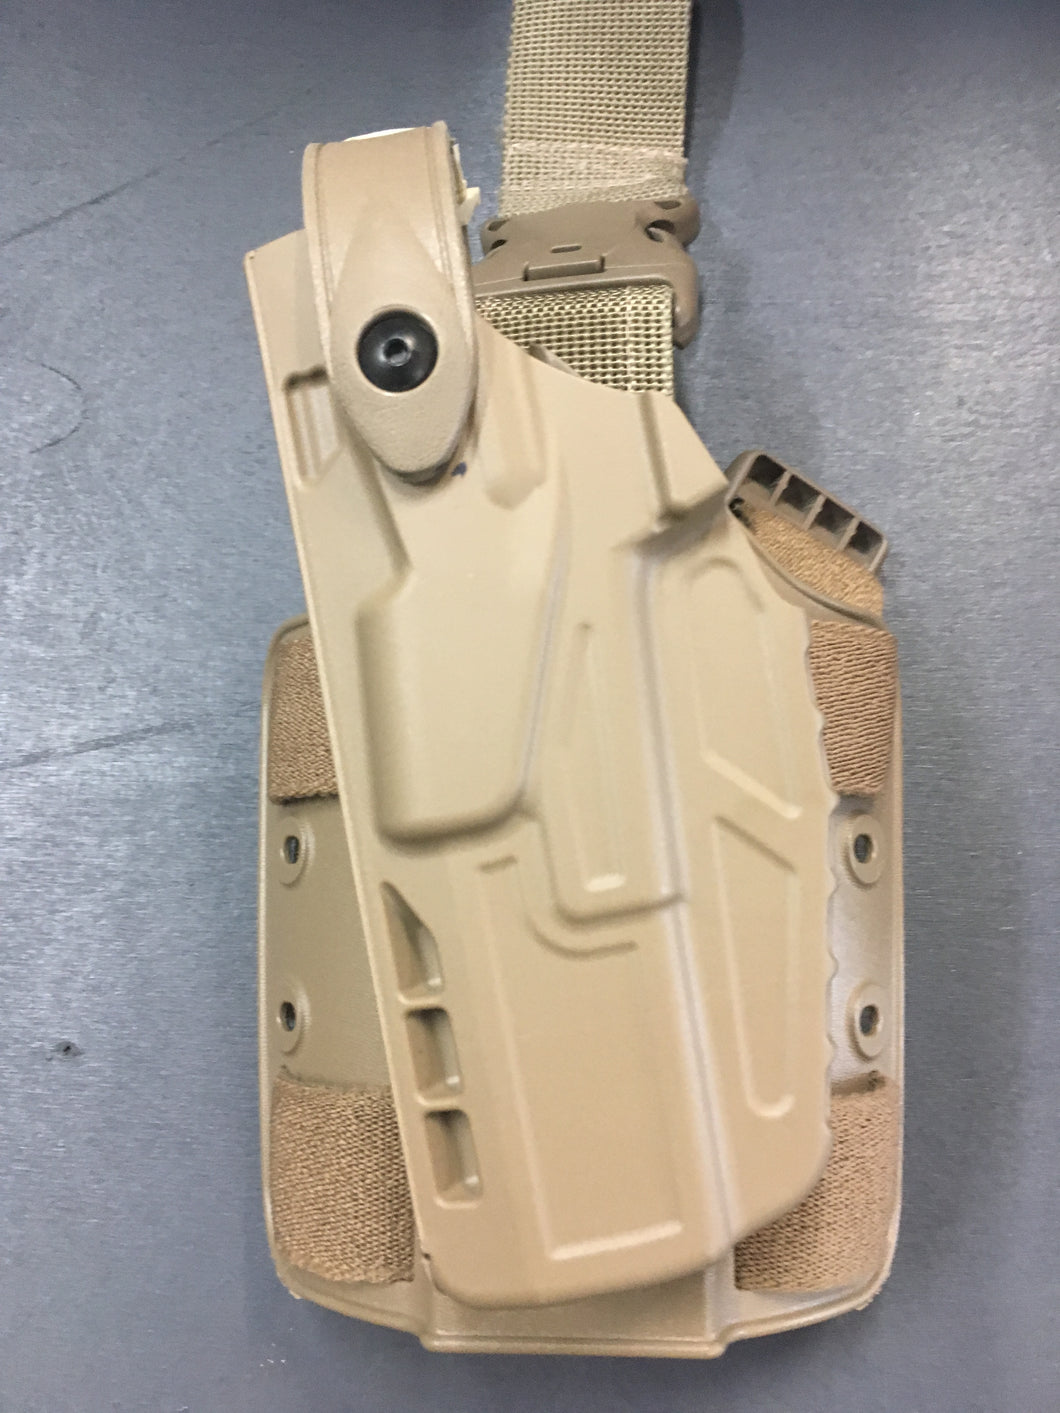 Coyote Brown Used Military Surplus Safariland Field  Holster with Drop Leg Attachment for Glock 17 or 19/LEFT HAND